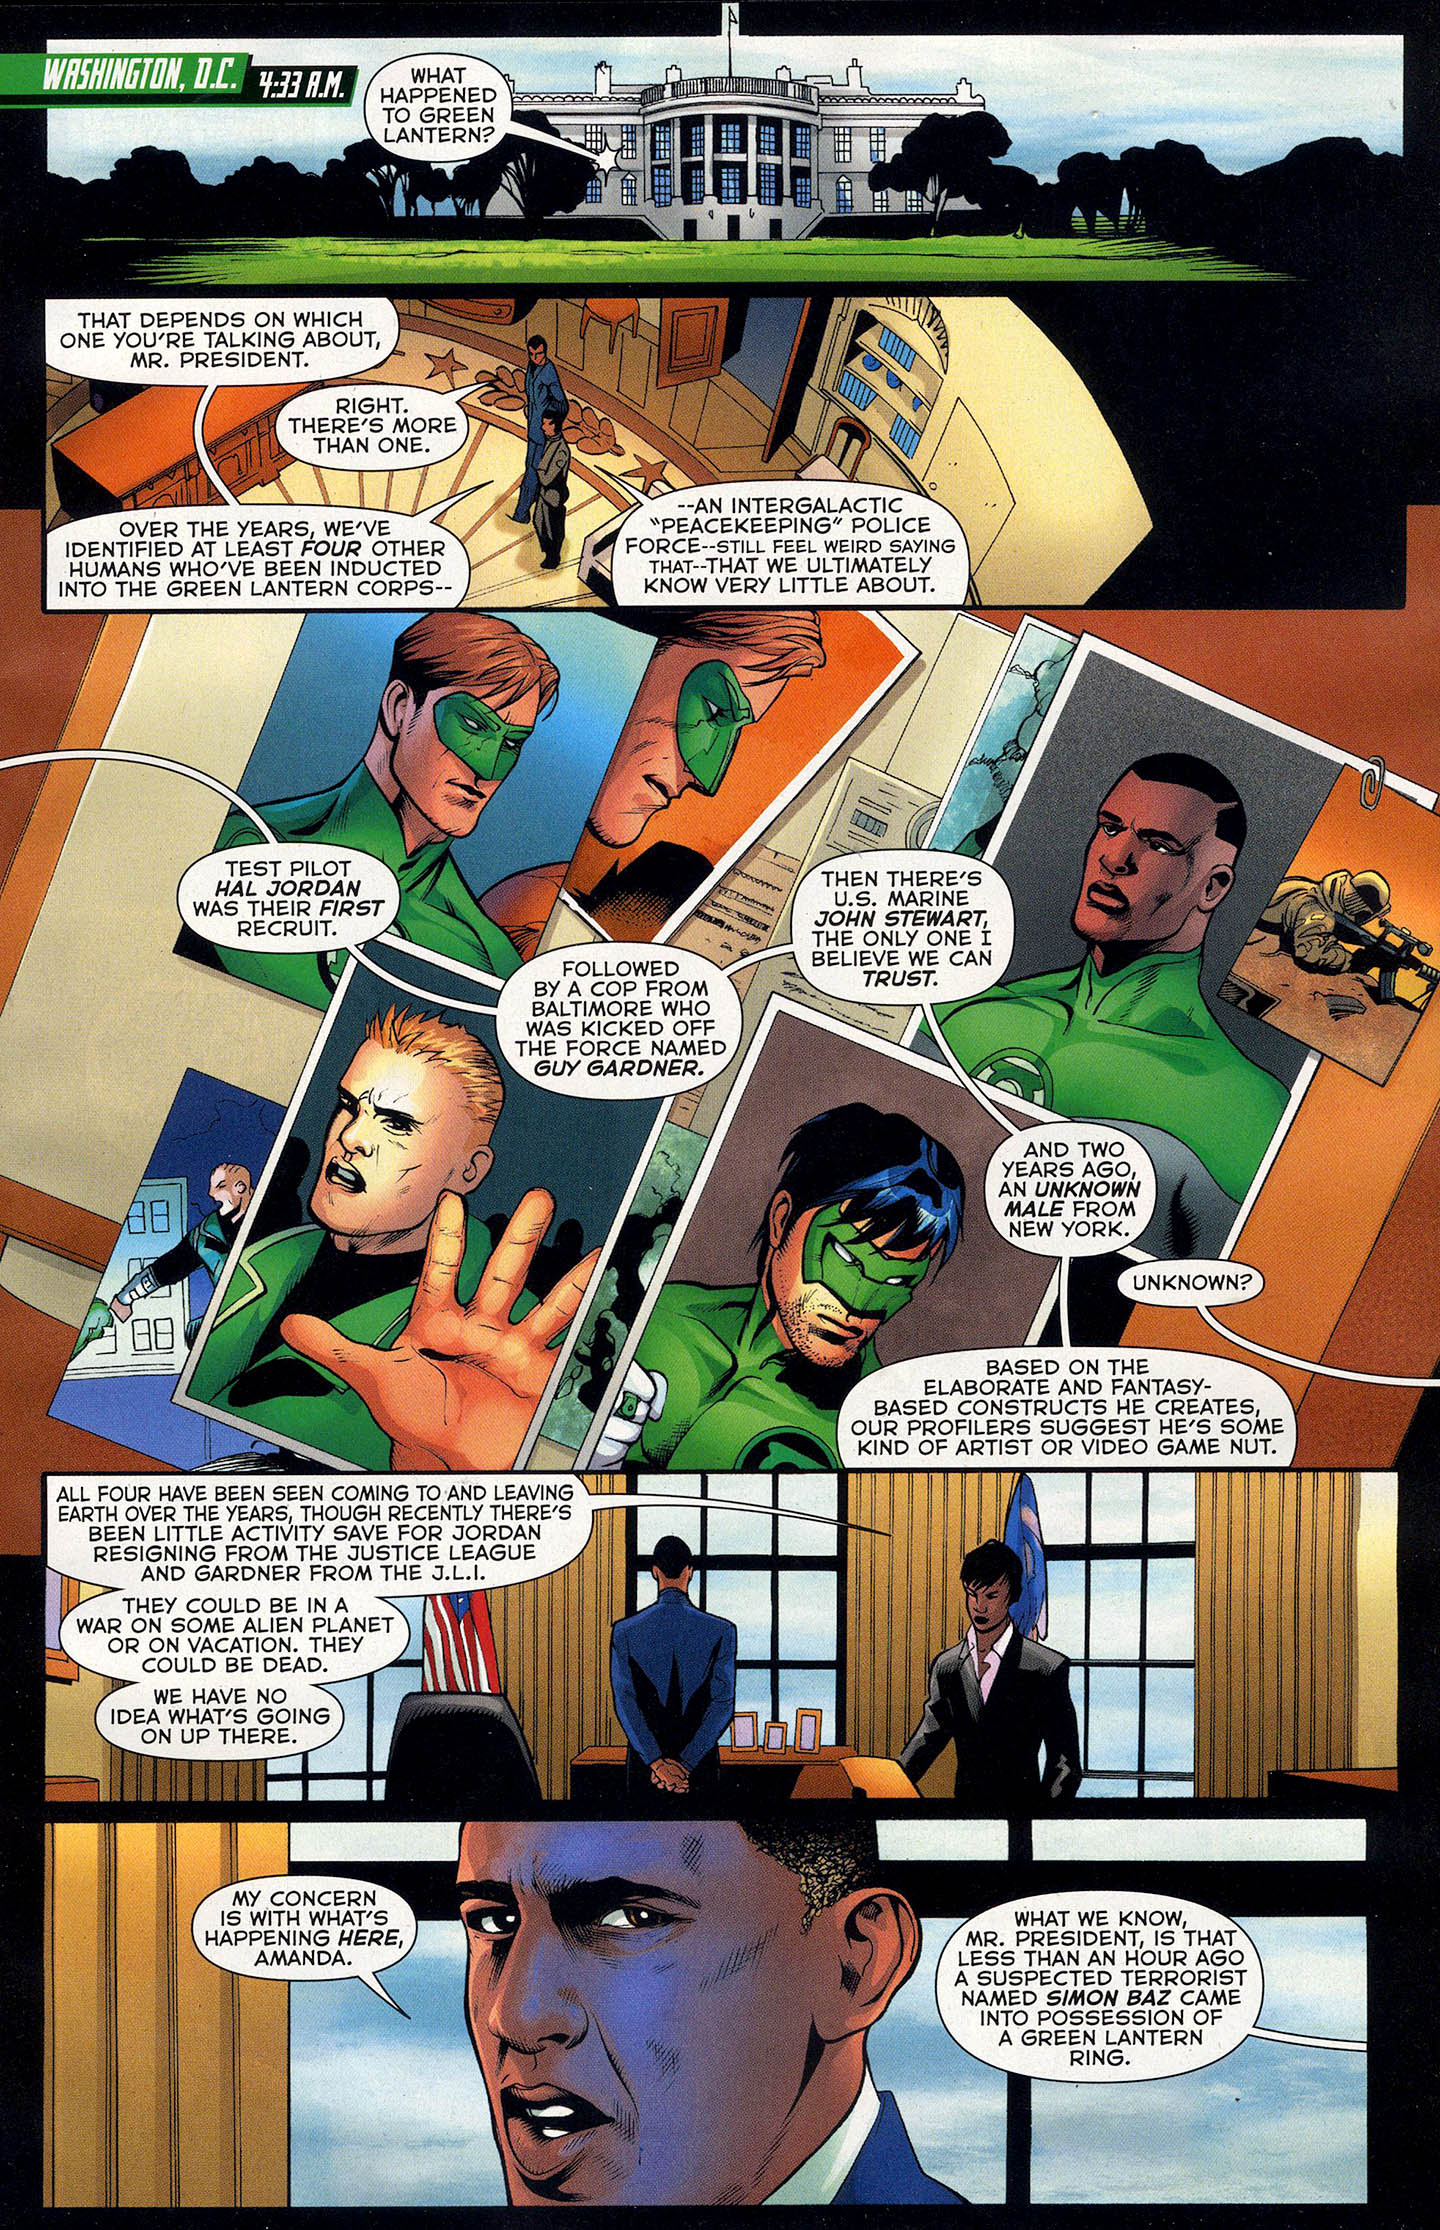 President Obama Knows What A Green Lantern Is 